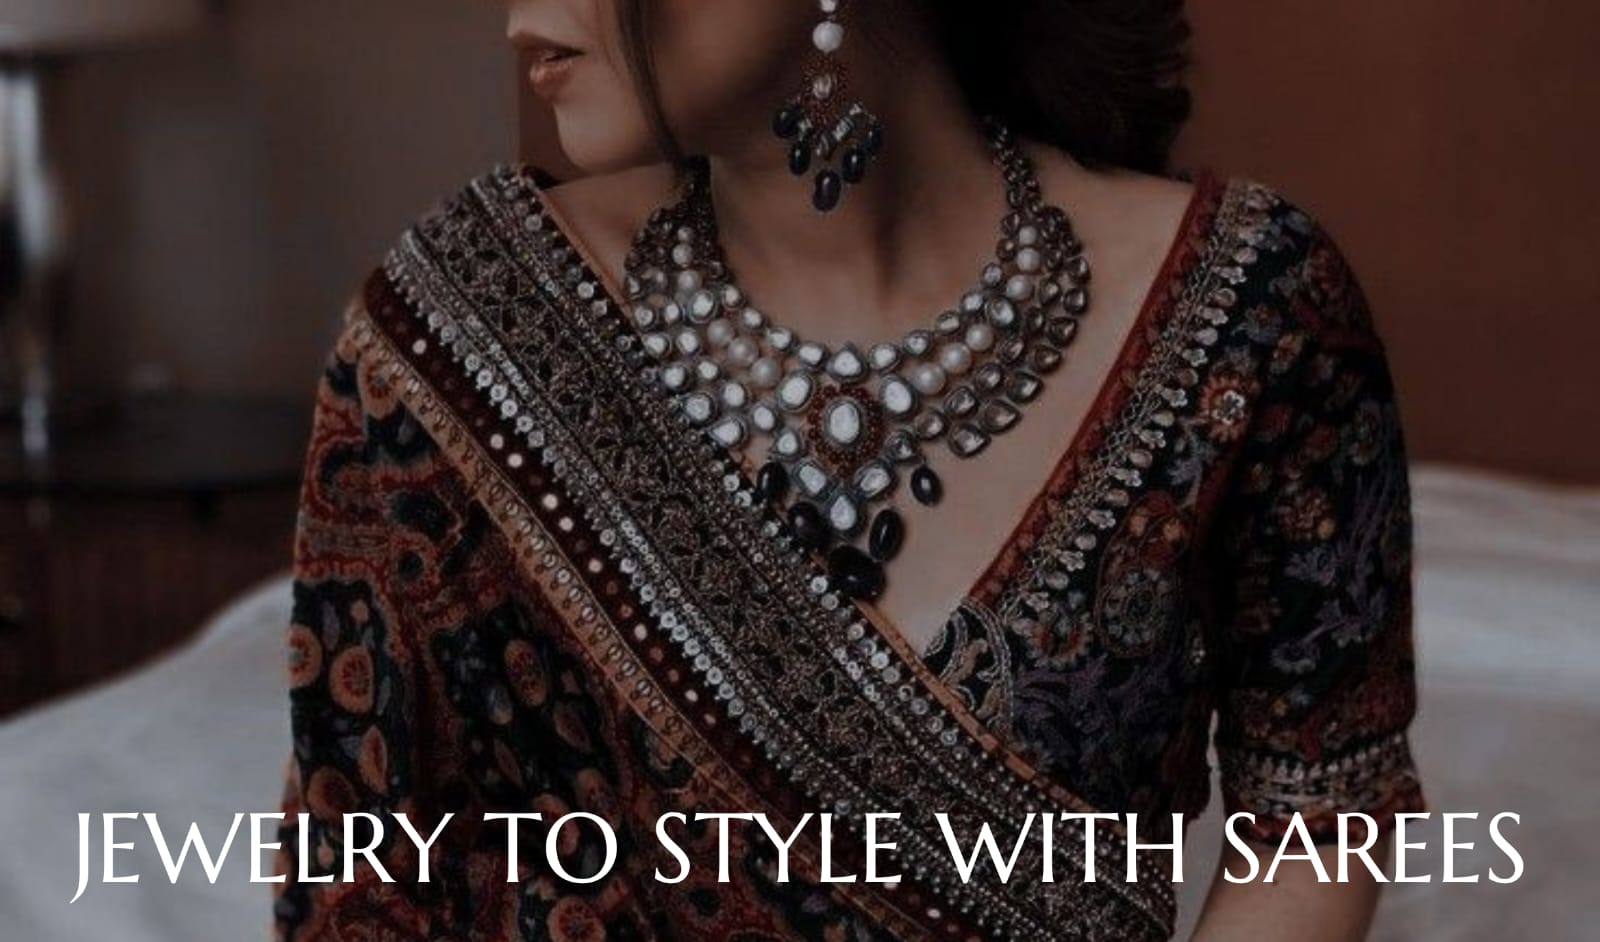 Jewelry to style with Sarees